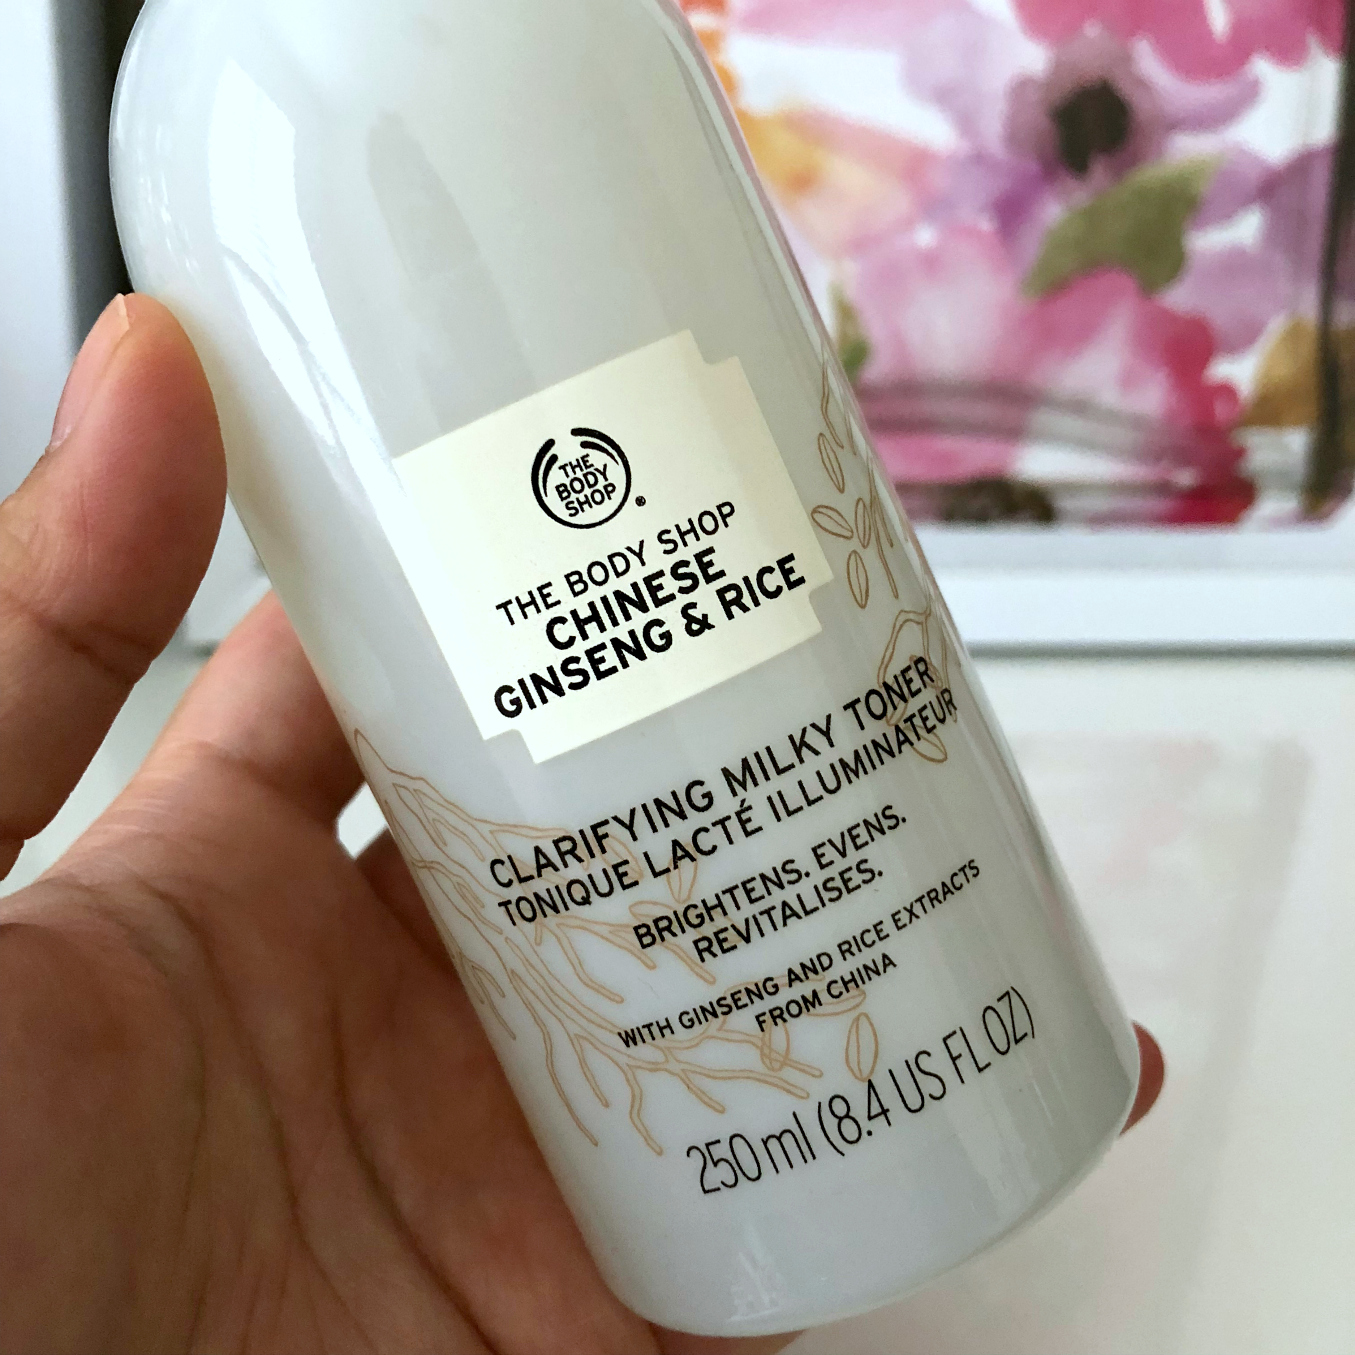 Body Shop - Anti-Imperfection Night and Chinese Ginseng & Rice Clarifying Milky Toner review* - miranda loves